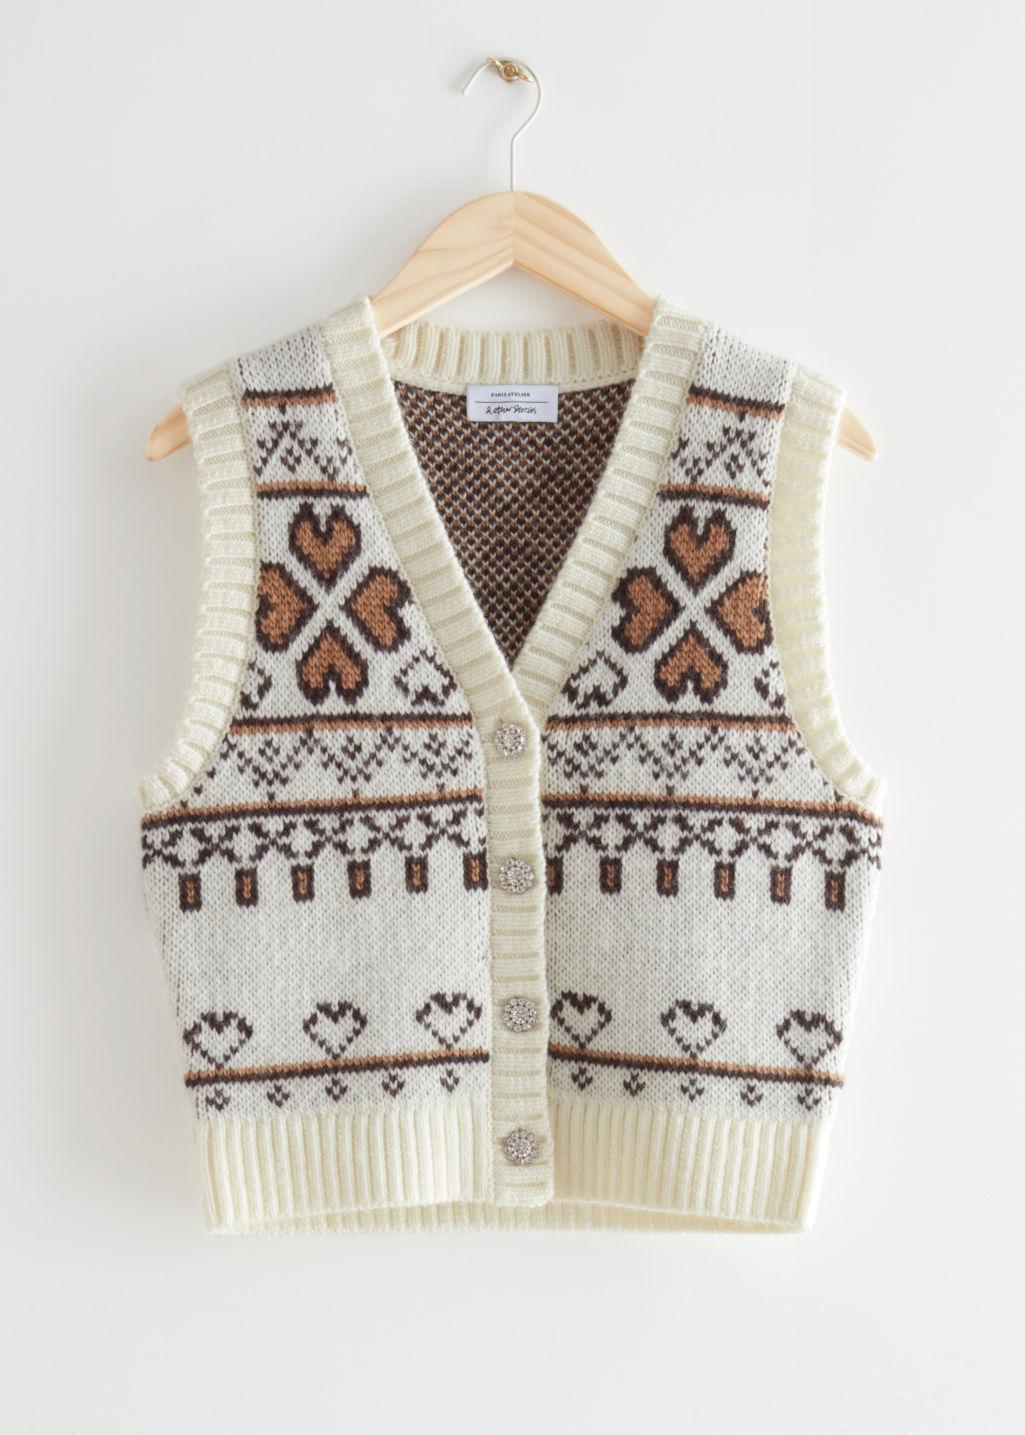 Governable Sæbe Studiet & Other Stories Jacquard Heart Knit Vest in Natural | Lyst